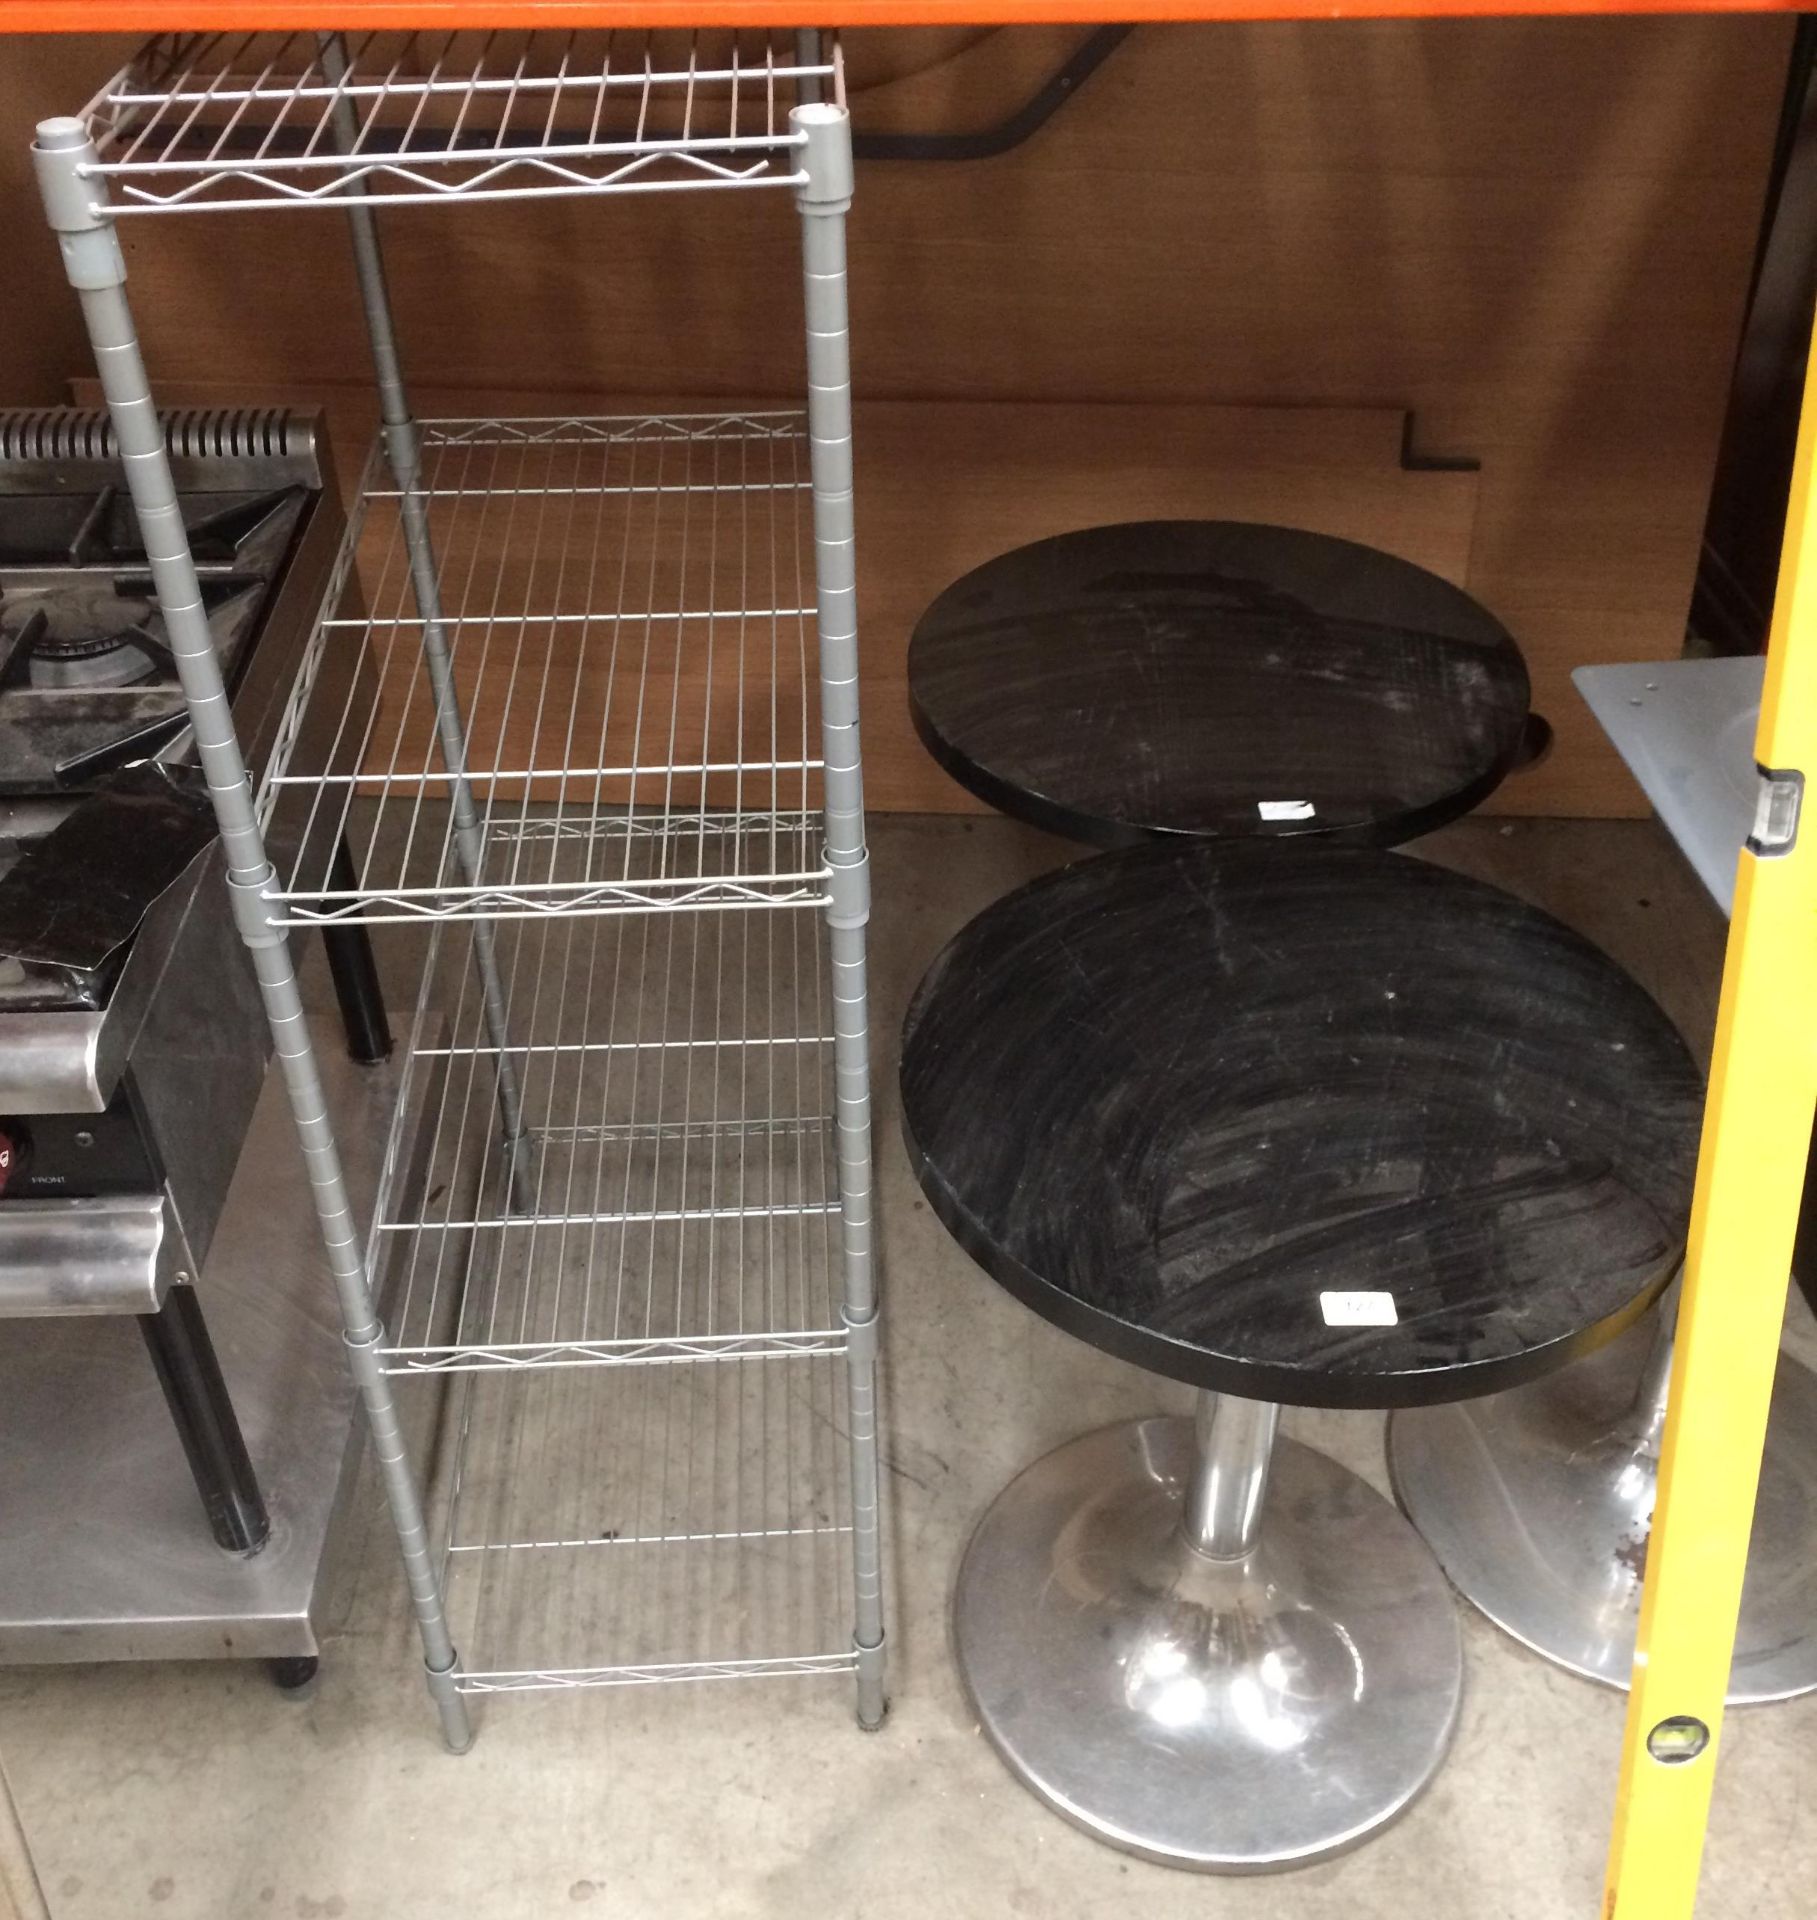 3 x black wooden cafe tables on chrome bases and a four shelf display rack